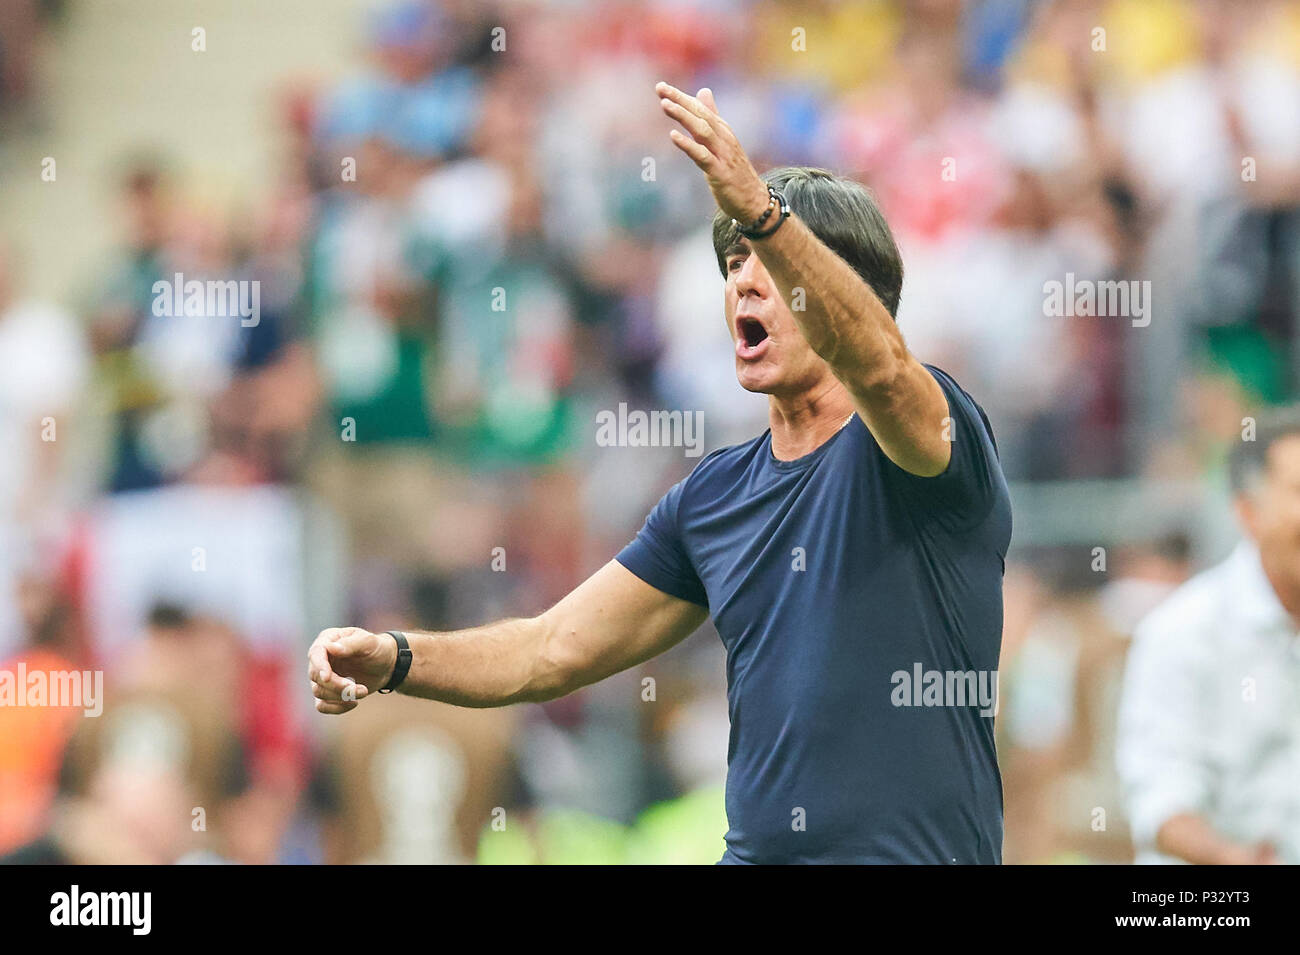 Moscow, Russia, 17 June 2018. Germany - Mexico, Soccer, Moscow, June 17, 2018  DFB headcoach Joachim Jogi LOEW, LÖW,Gesticulates and giving instructions, action, single image, gesture, gesture, hand movement, pointing, interpret, mimik,  GERMANY - MEXICO FIFA WORLD CUP 2018 RUSSIA, Group F, Season 2018/2019,  June 17, 2018 L u z h n i k i Stadium in Moscow, Russia.  © Peter Schatz / Alamy Live News Stock Photo